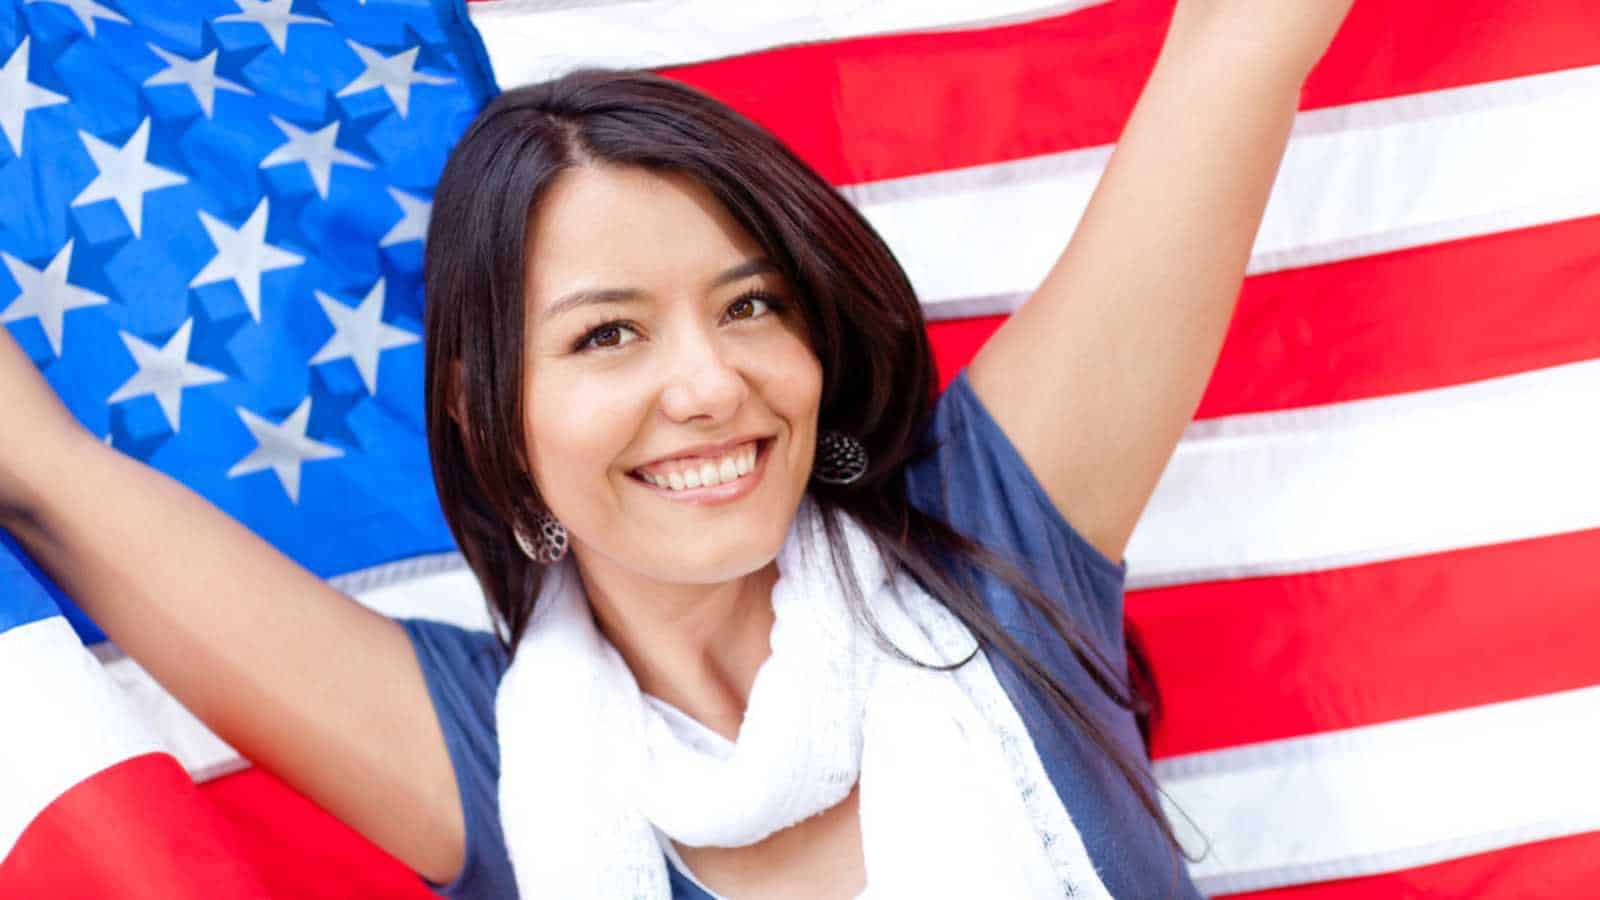 Proud woman with American flag